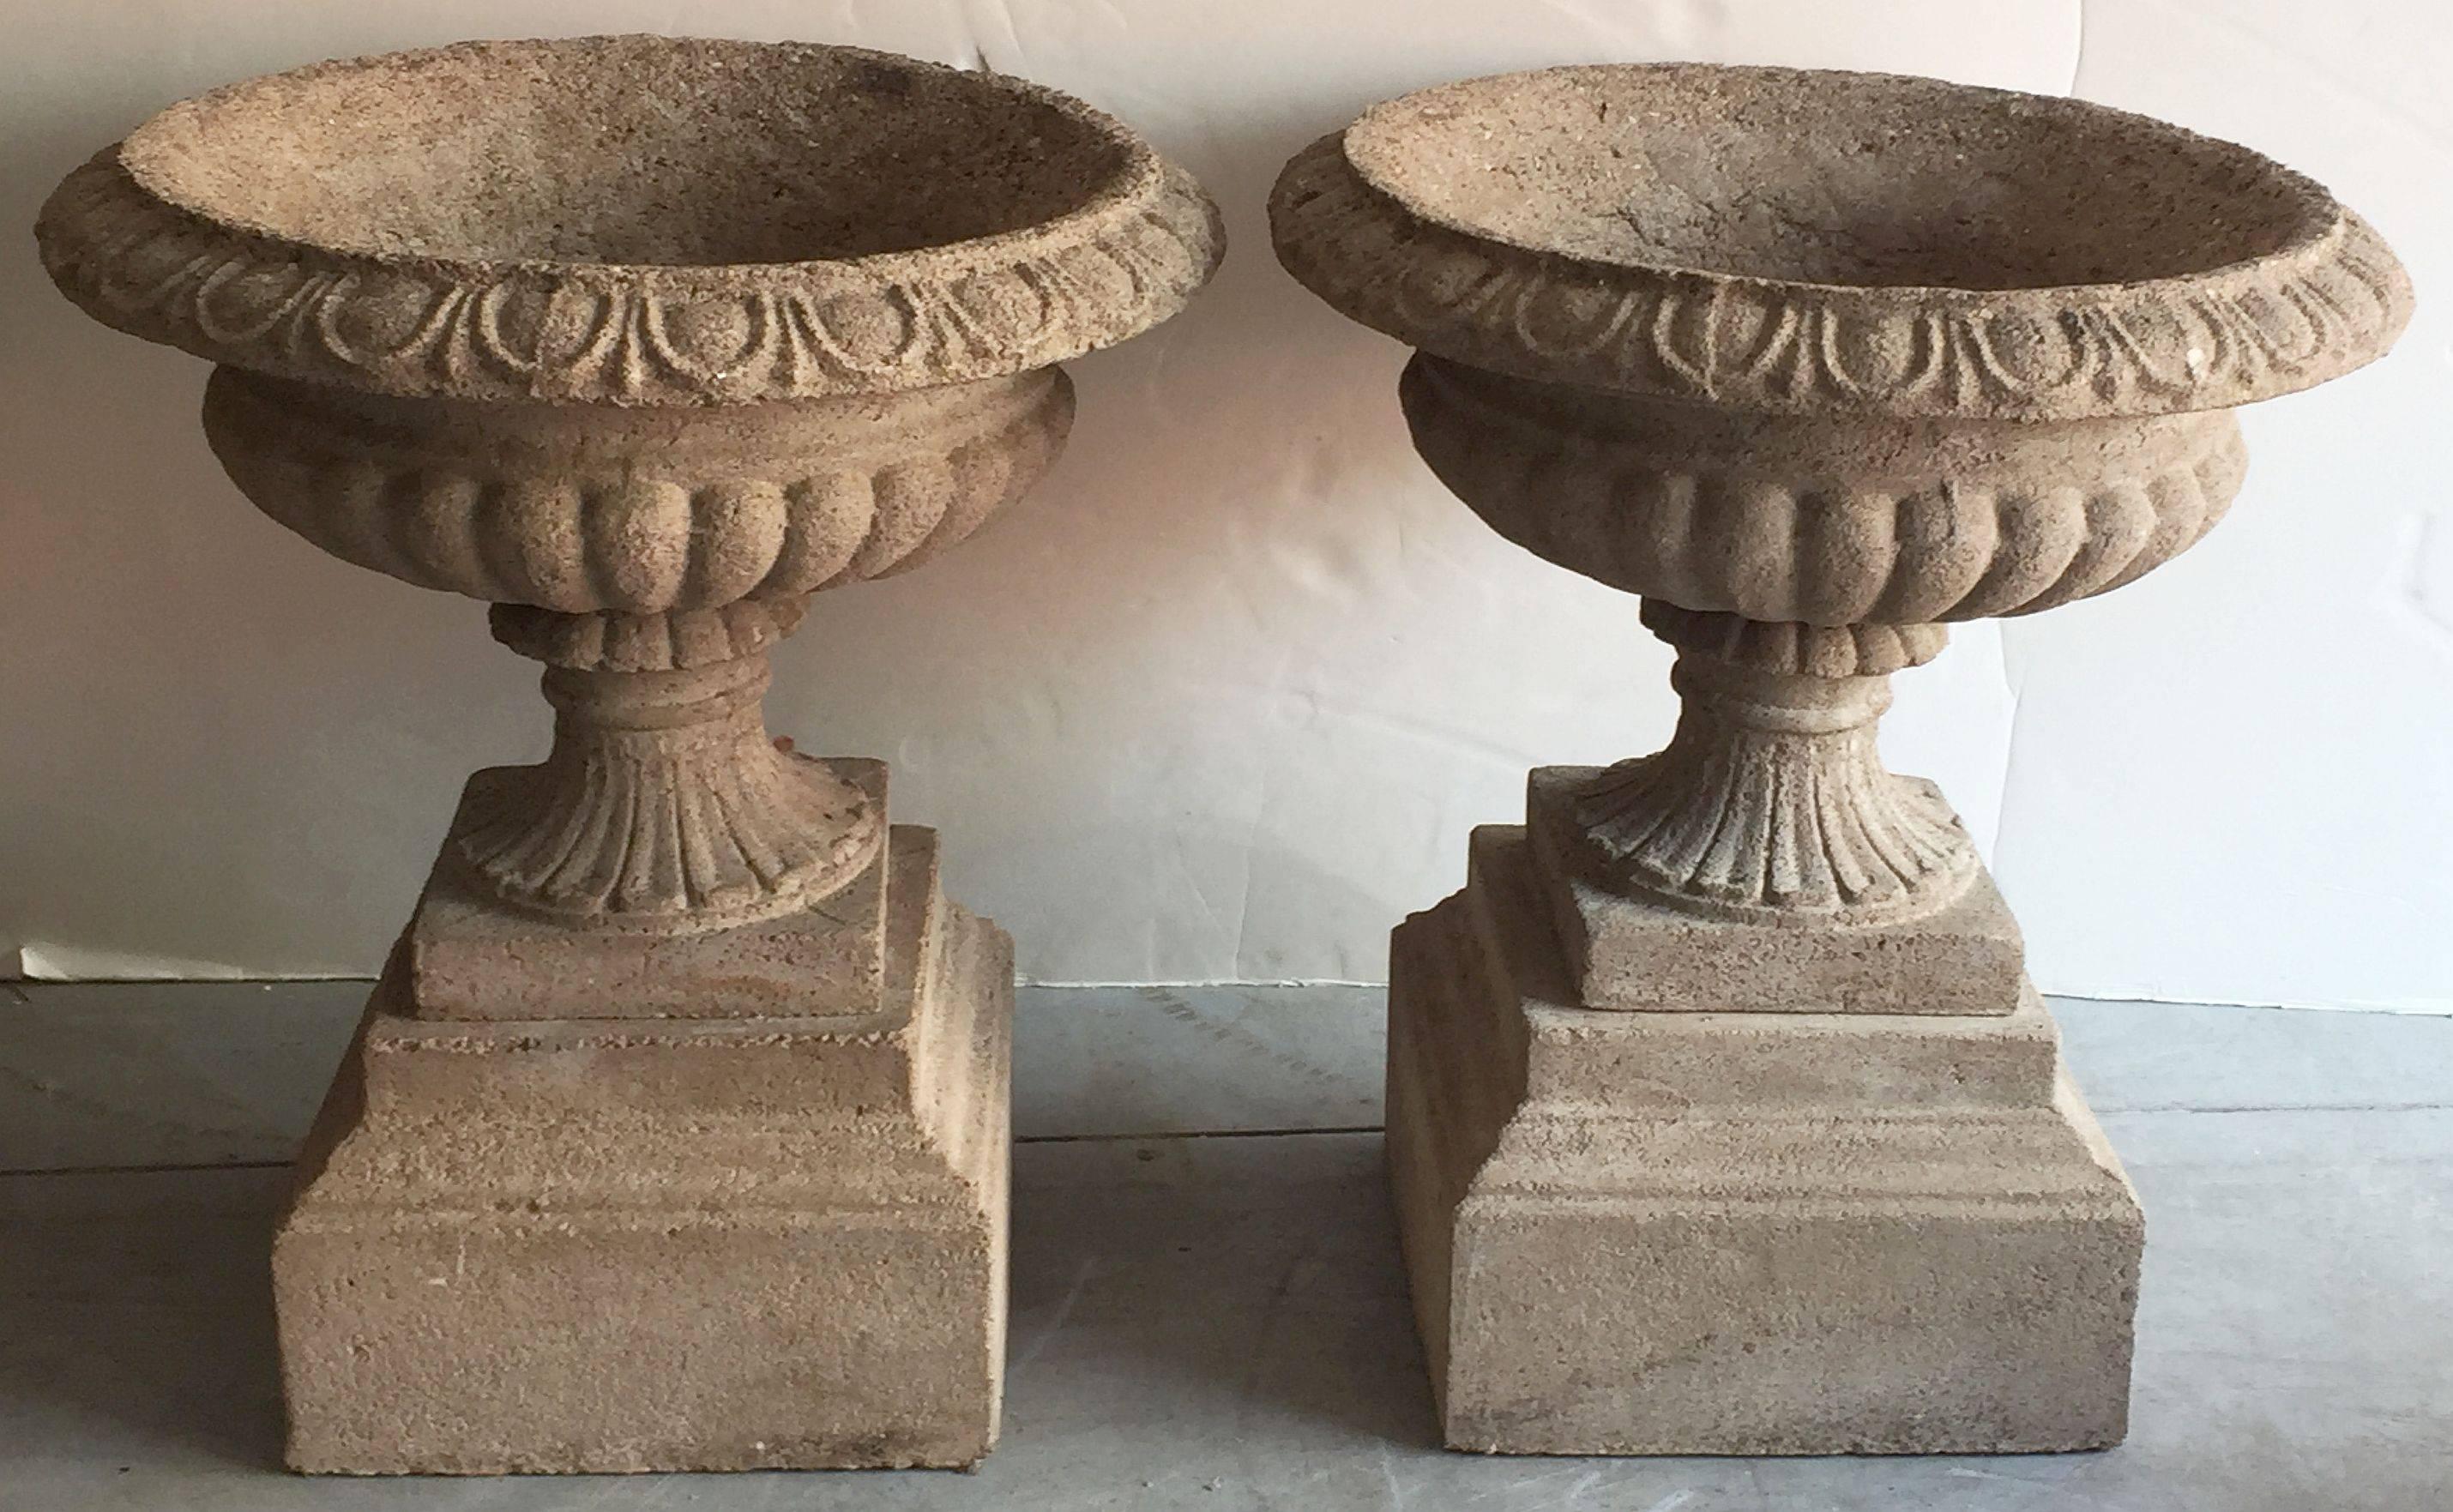 20th Century English Garden Stone Urns or Planter Pots on Plinths 'Individually Priced'